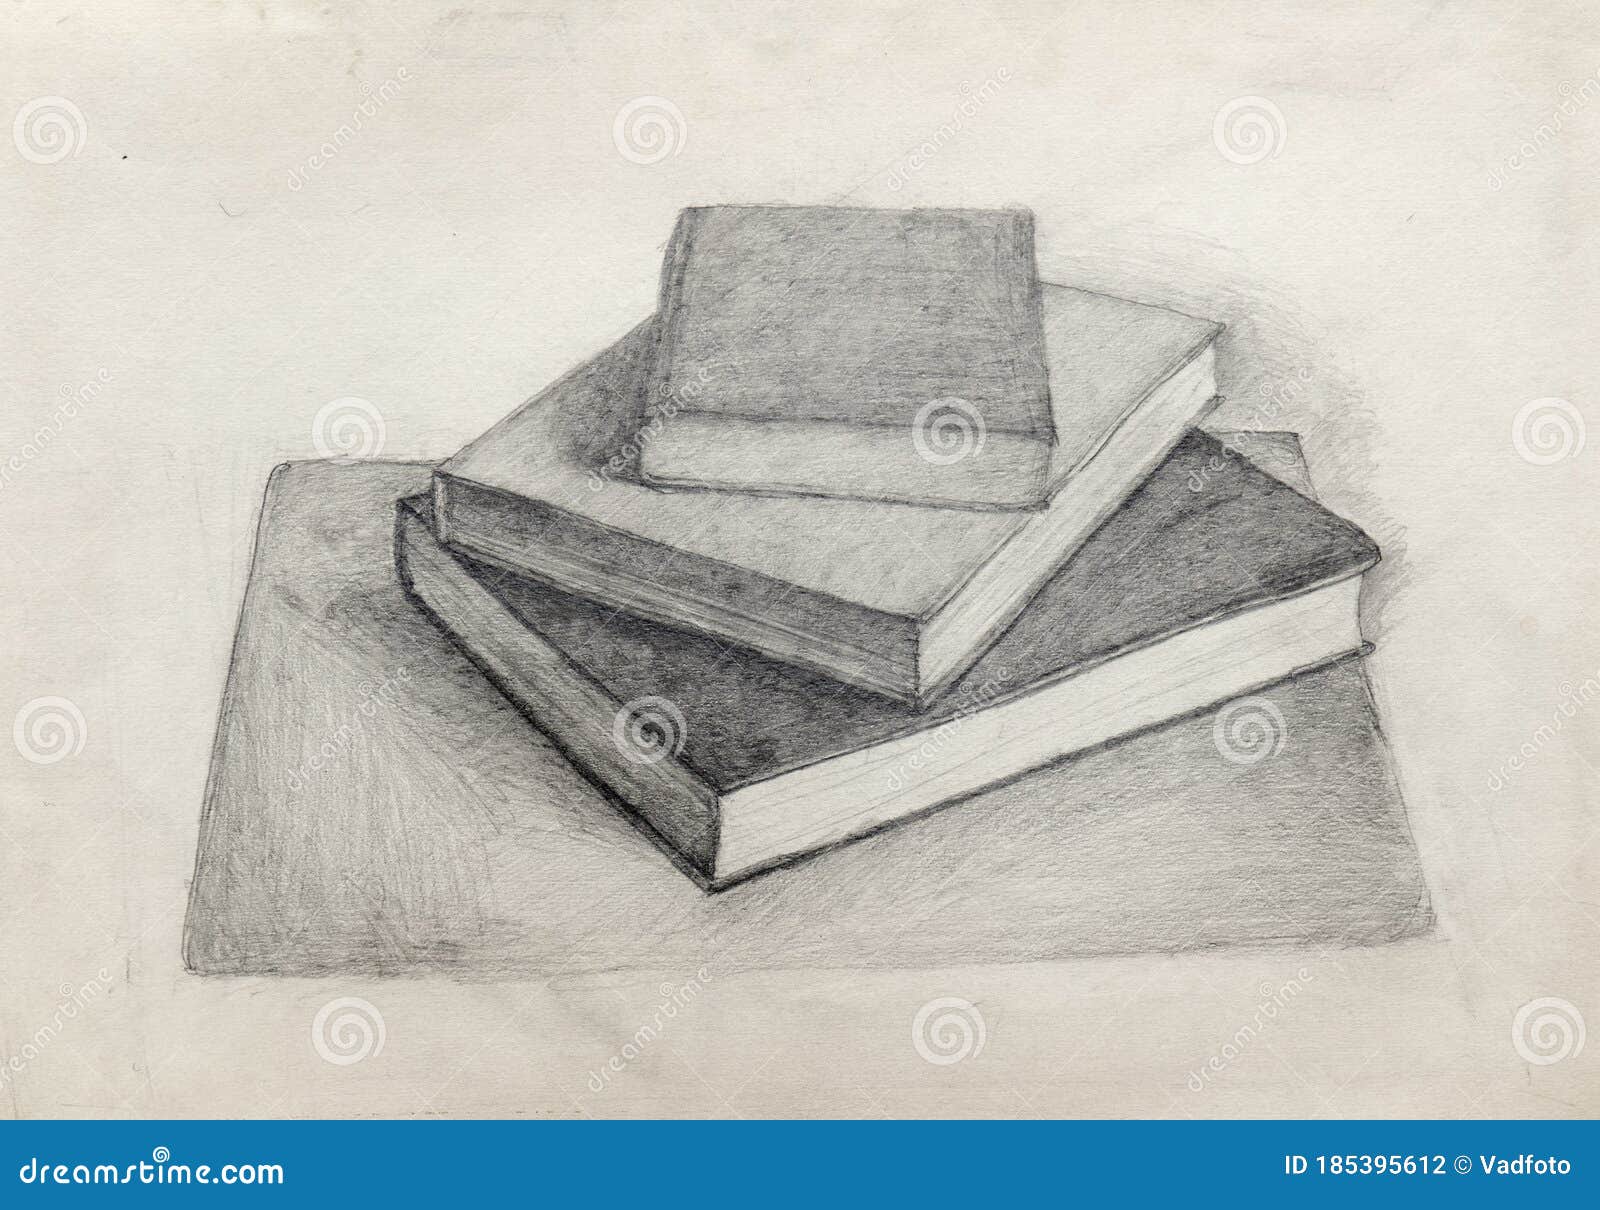 still life sketch for beginners Hot Sale - OFF 64%